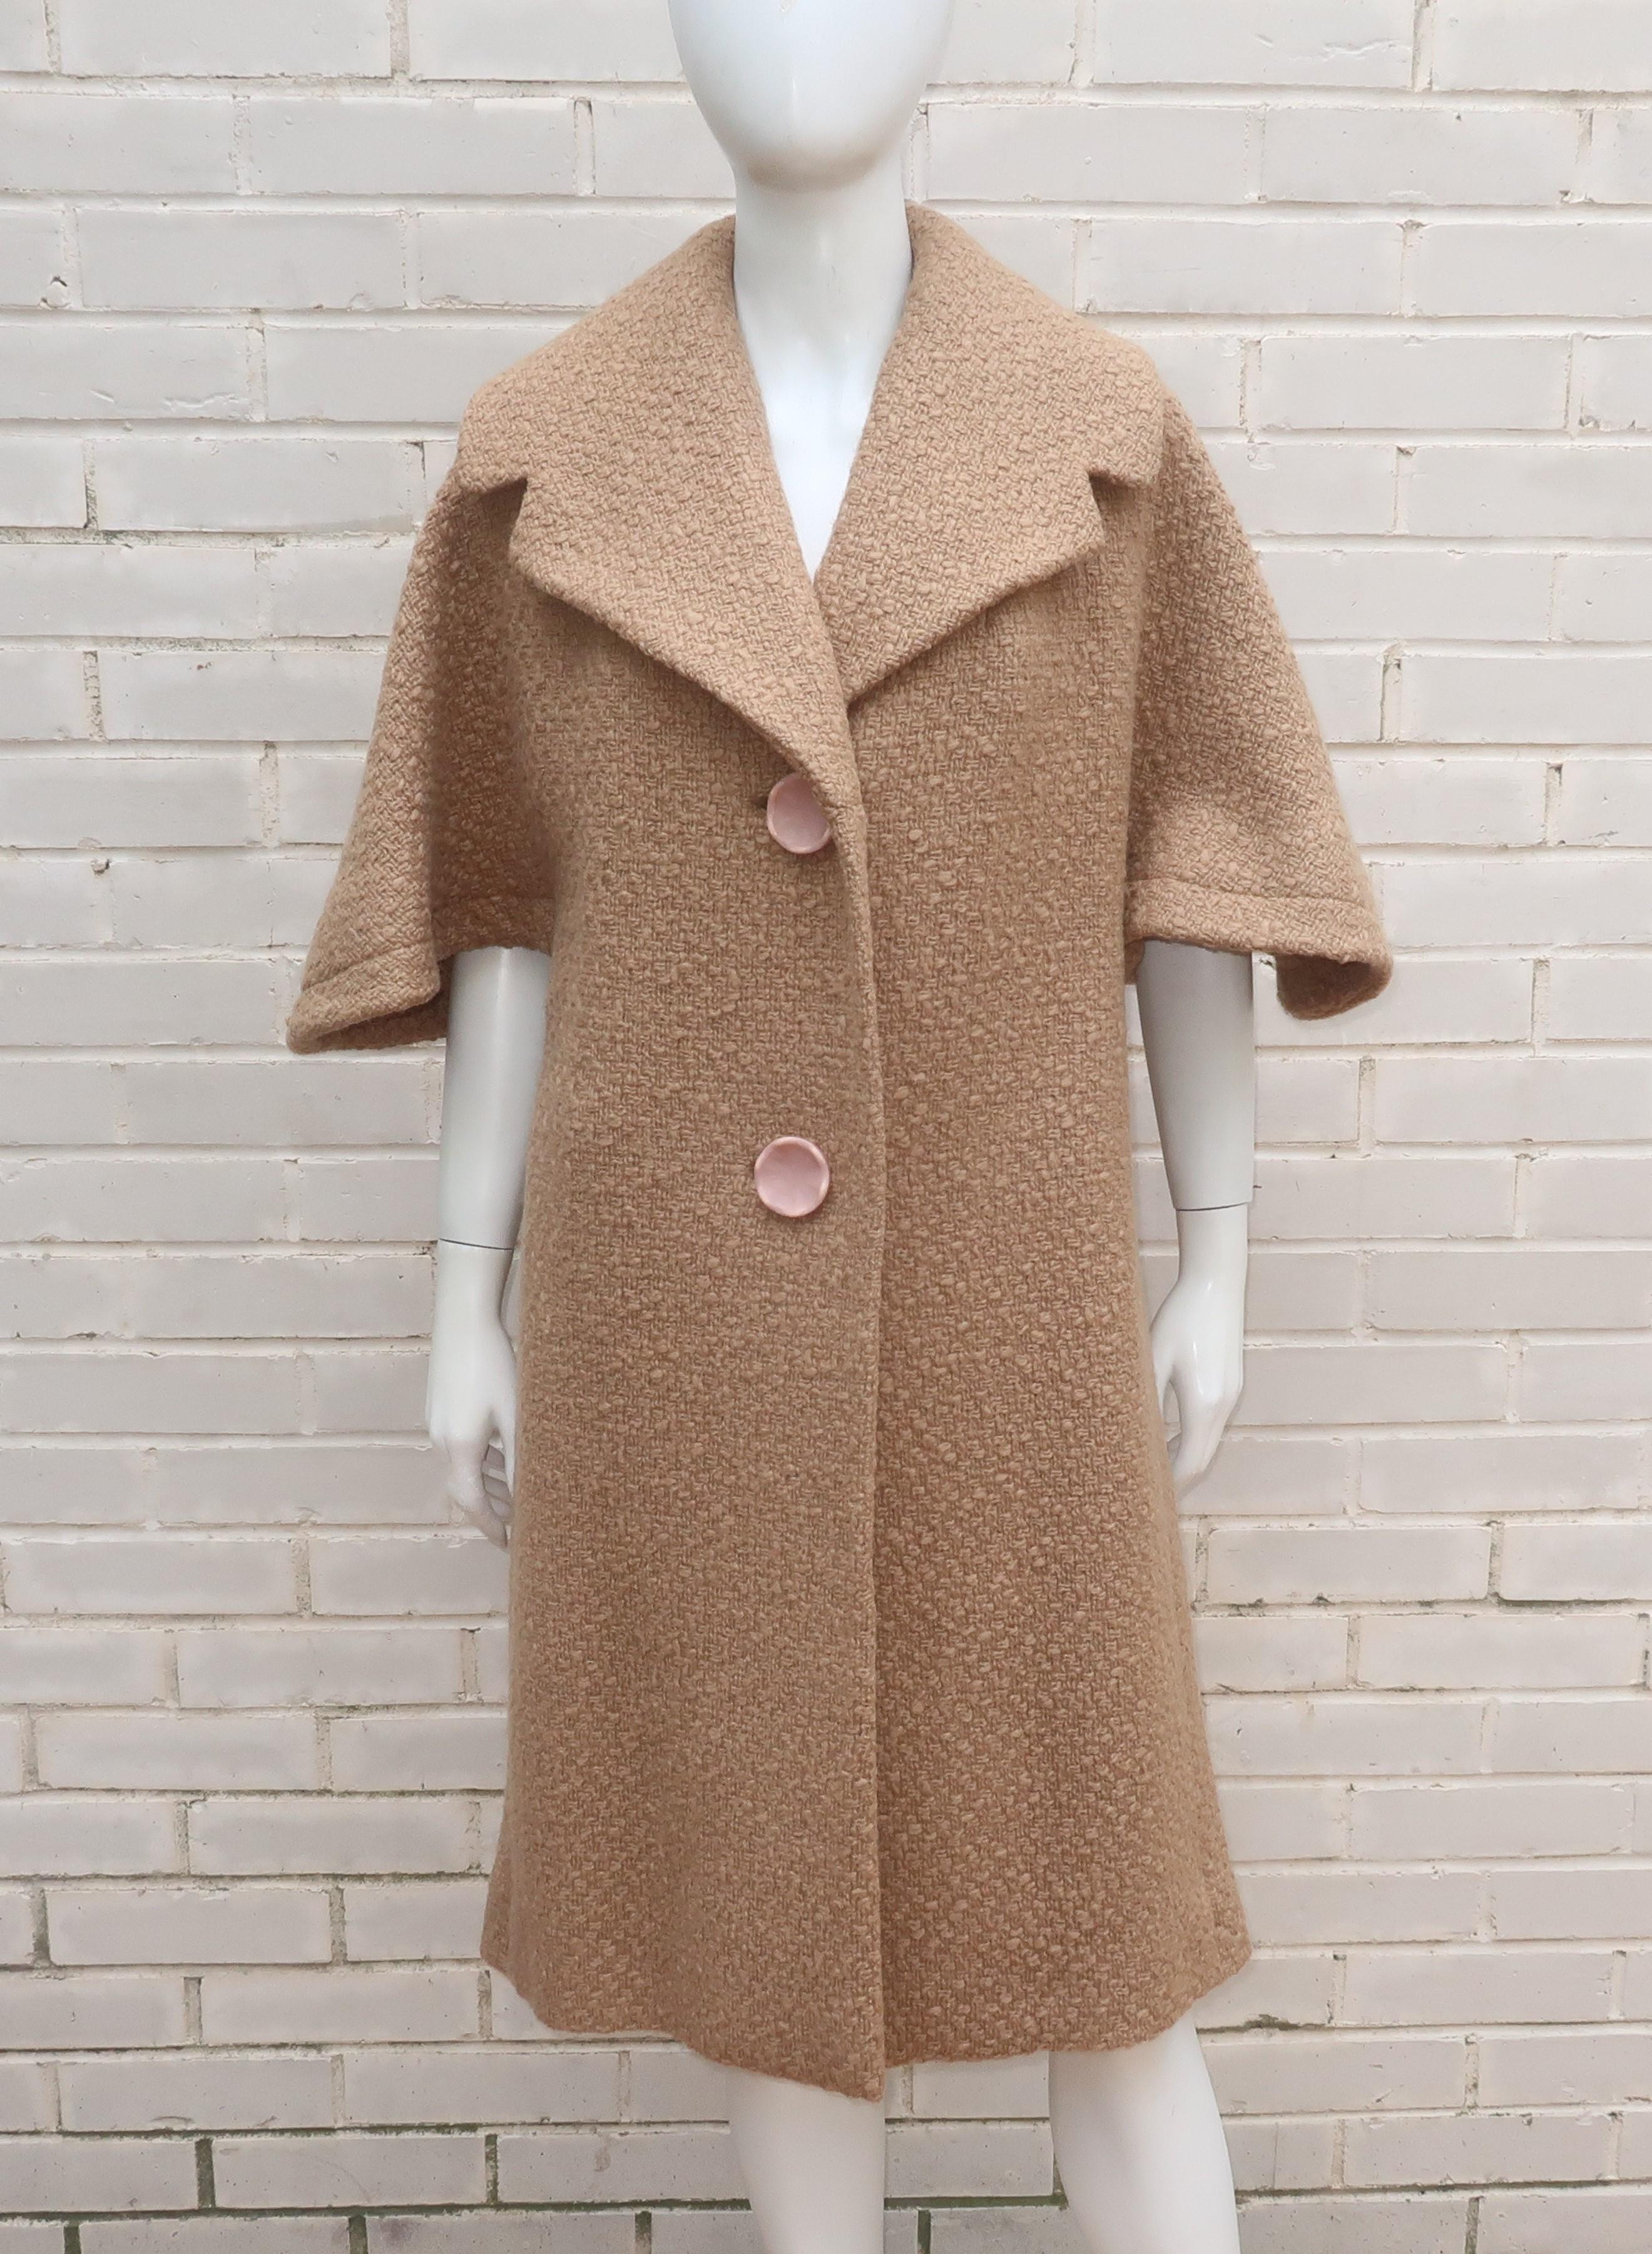 1950’s taupe wool boucle coat with unique 3/4 sleeves that provide a capelet style silhouette.  The coat buttons at the front and features faux vent panels at the sides with hidden pockets.  Fully lined in silk satin.  It has a Hitchcock heroine